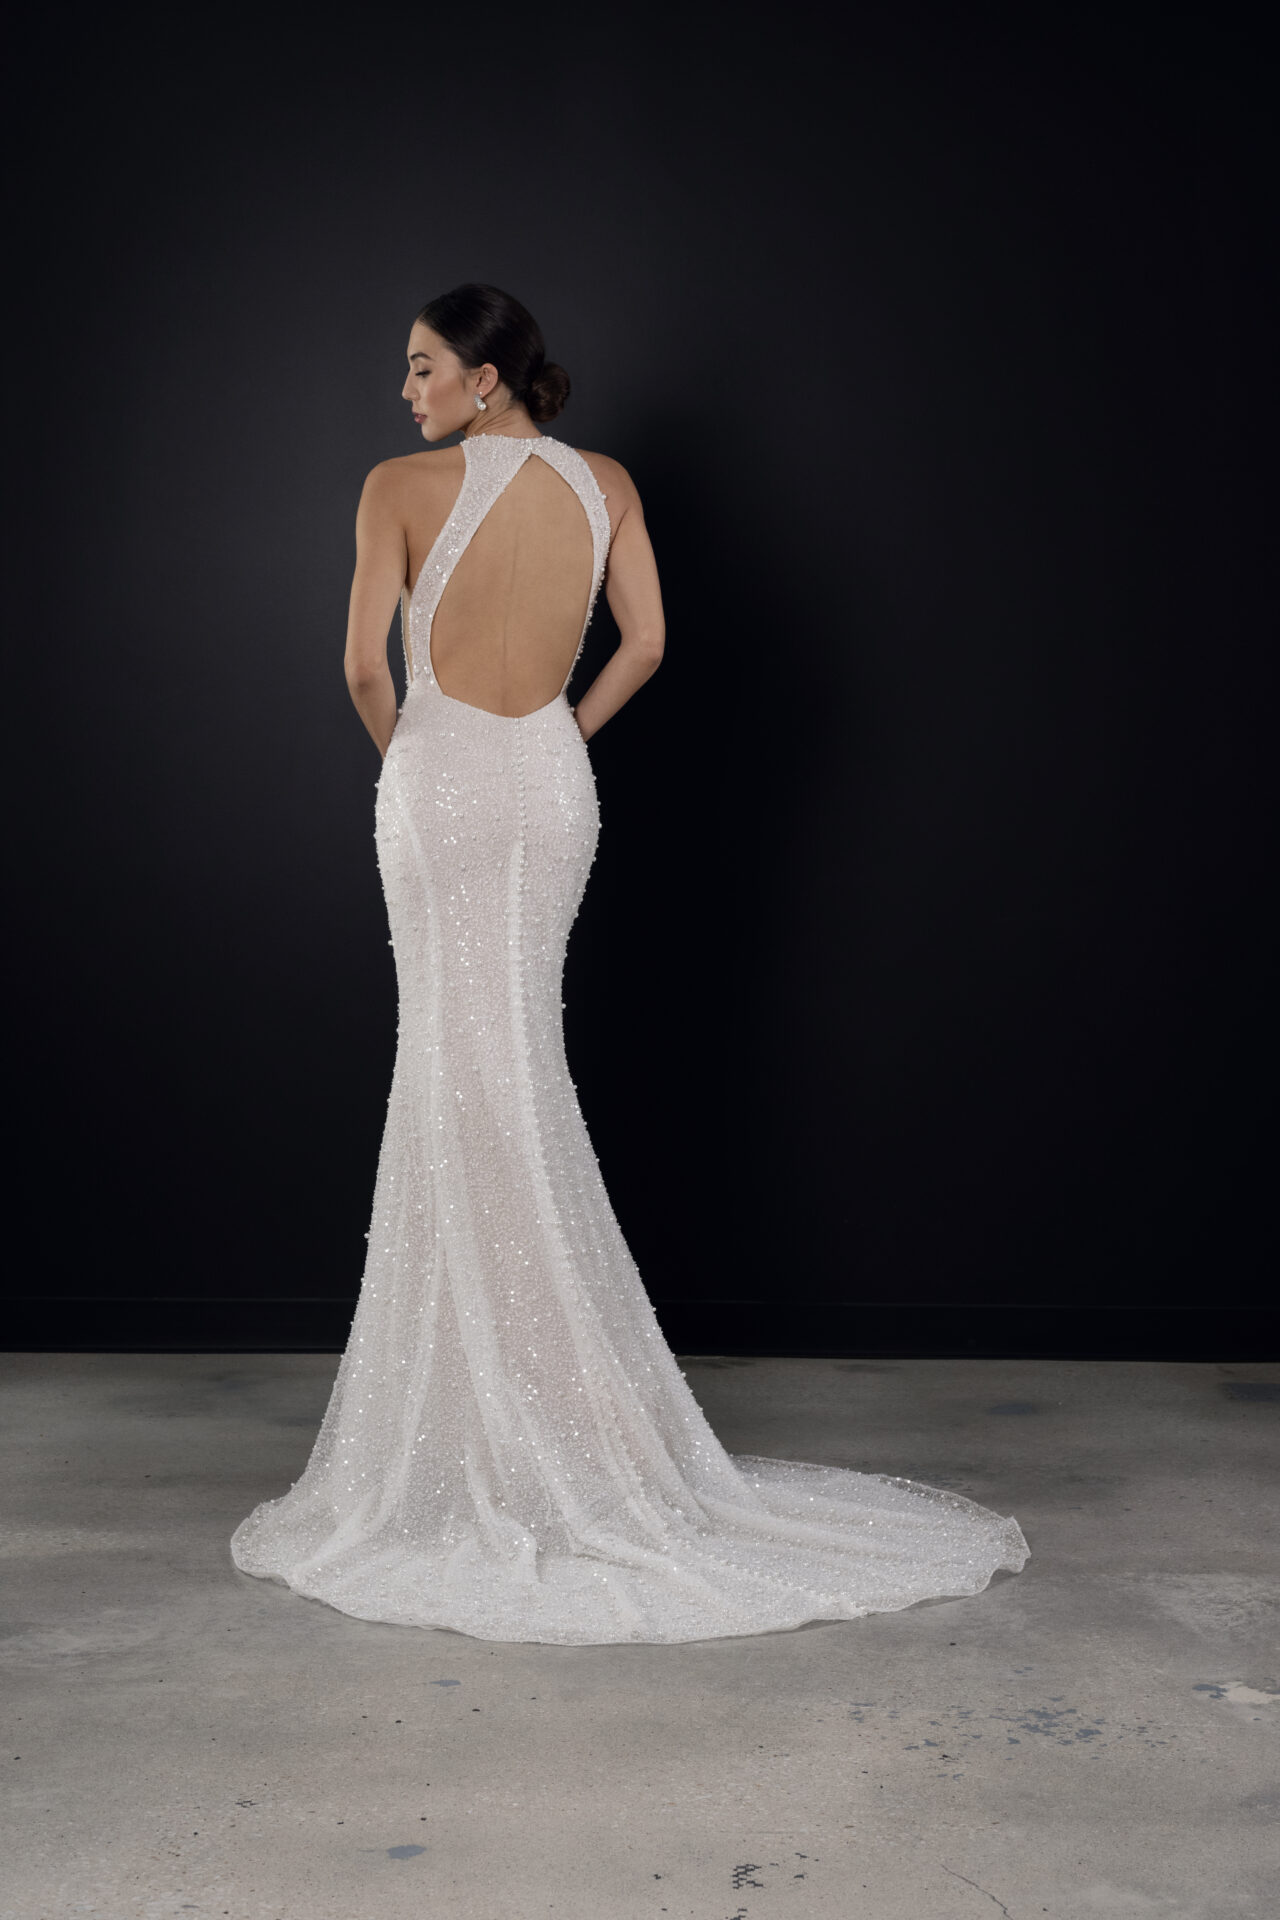 Chic High-Neck Beaded Fit-and-Flare Wedding Dress With Open Back by Martina Liana - Image 2